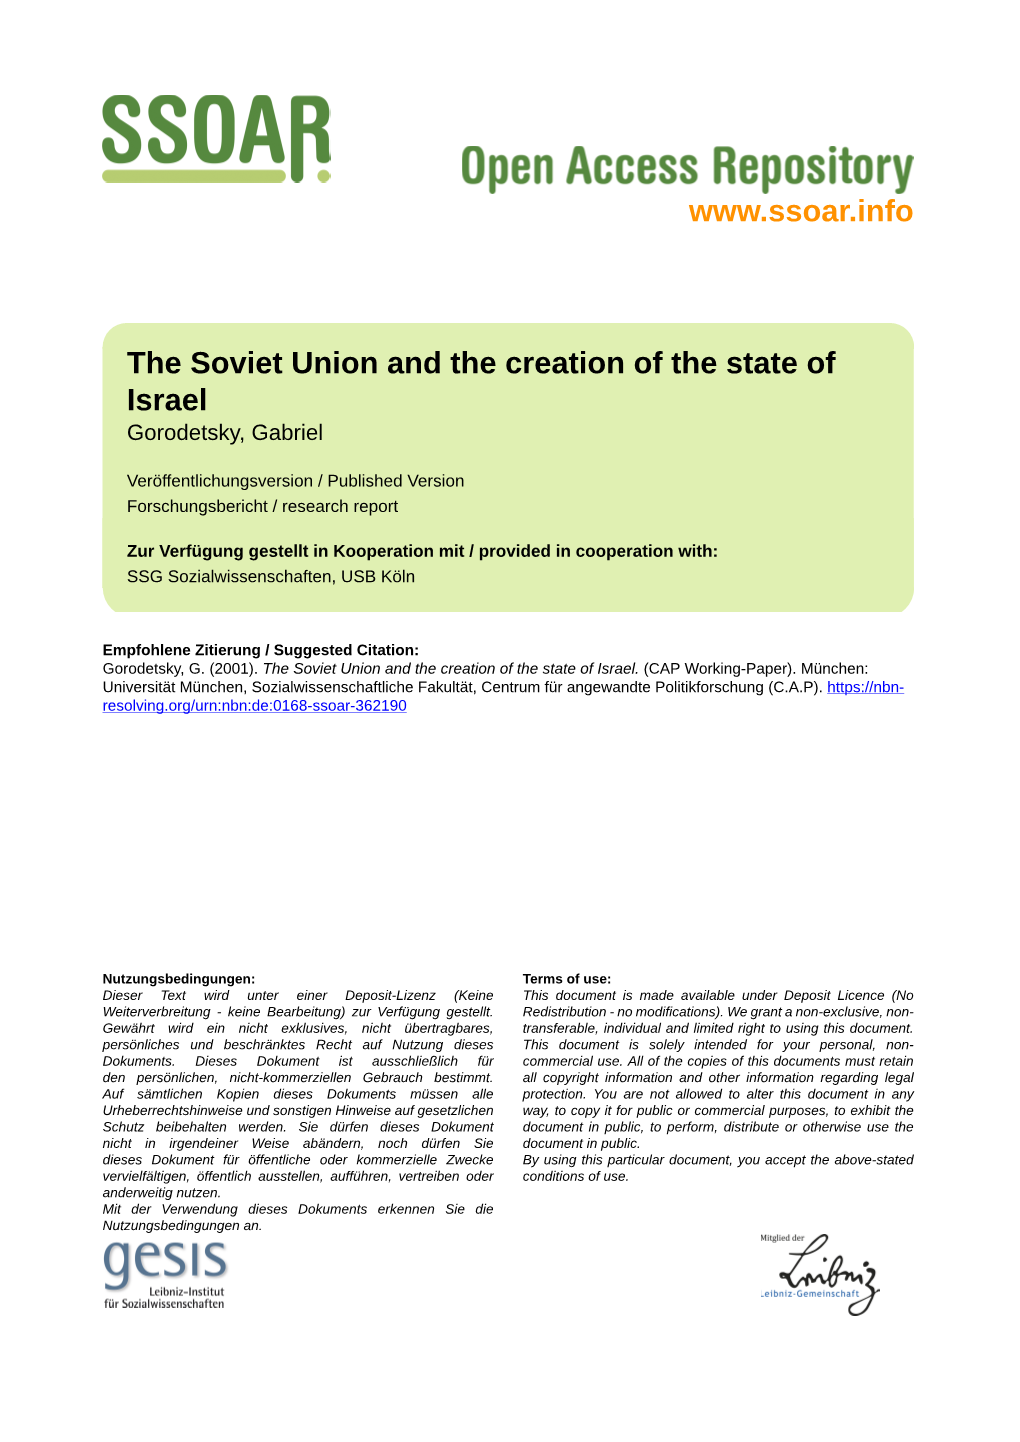 The Soviet Union and the Creation of the State of Israel Gorodetsky, Gabriel